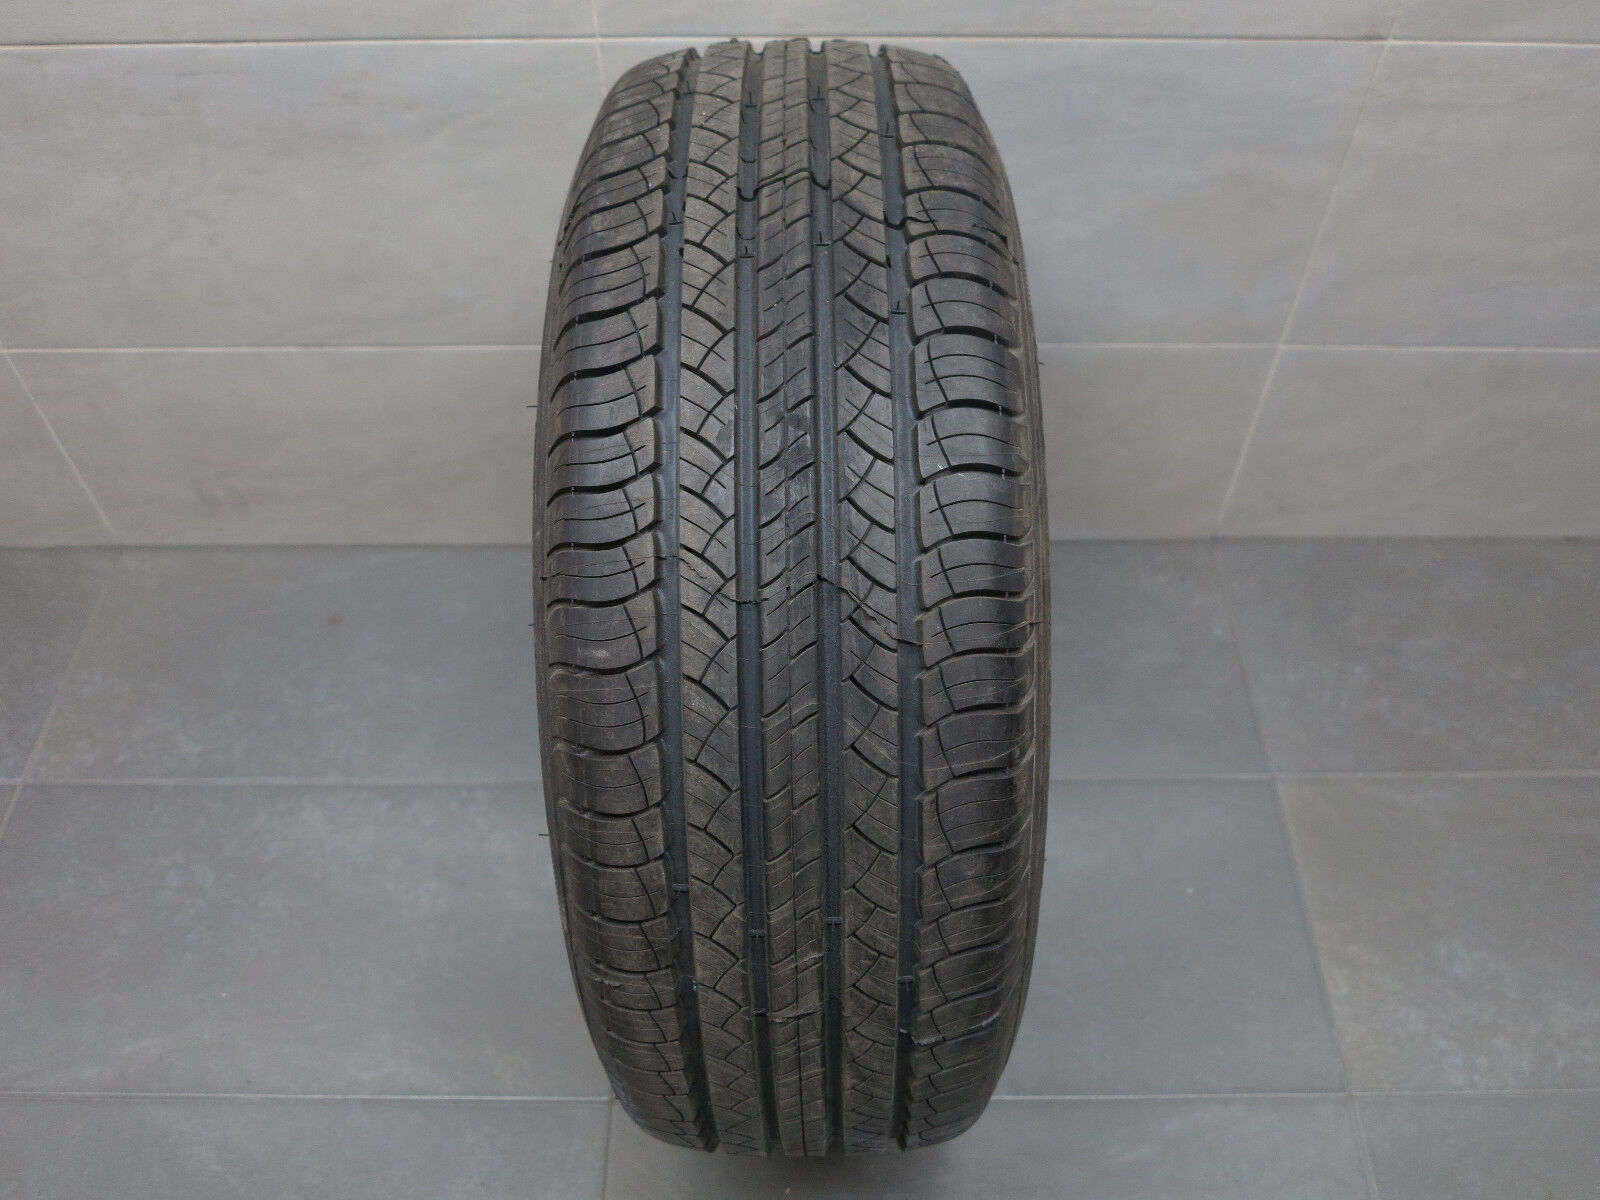 1x Normal Tyre Michelin Latitude Tour Hp 235/65 R17 104h M+s Mo 8,0 Mm